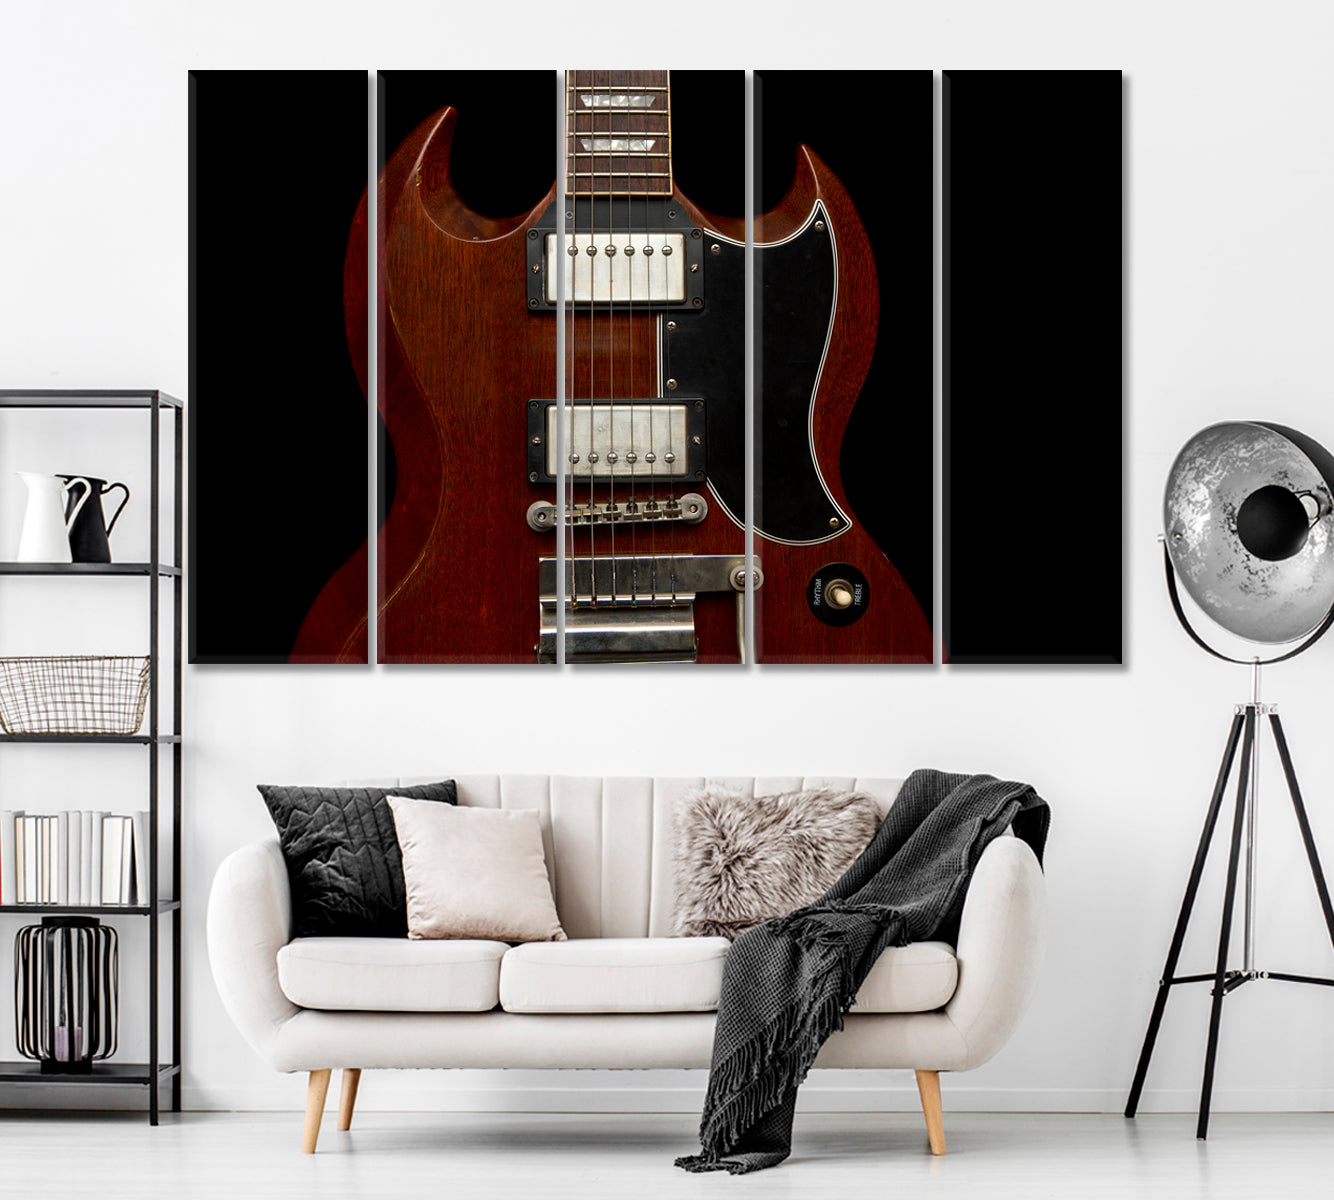 Gibson SG 1964 Electric Guitar Canvas Print ArtLexy 5 Panels 36"x24" inches 